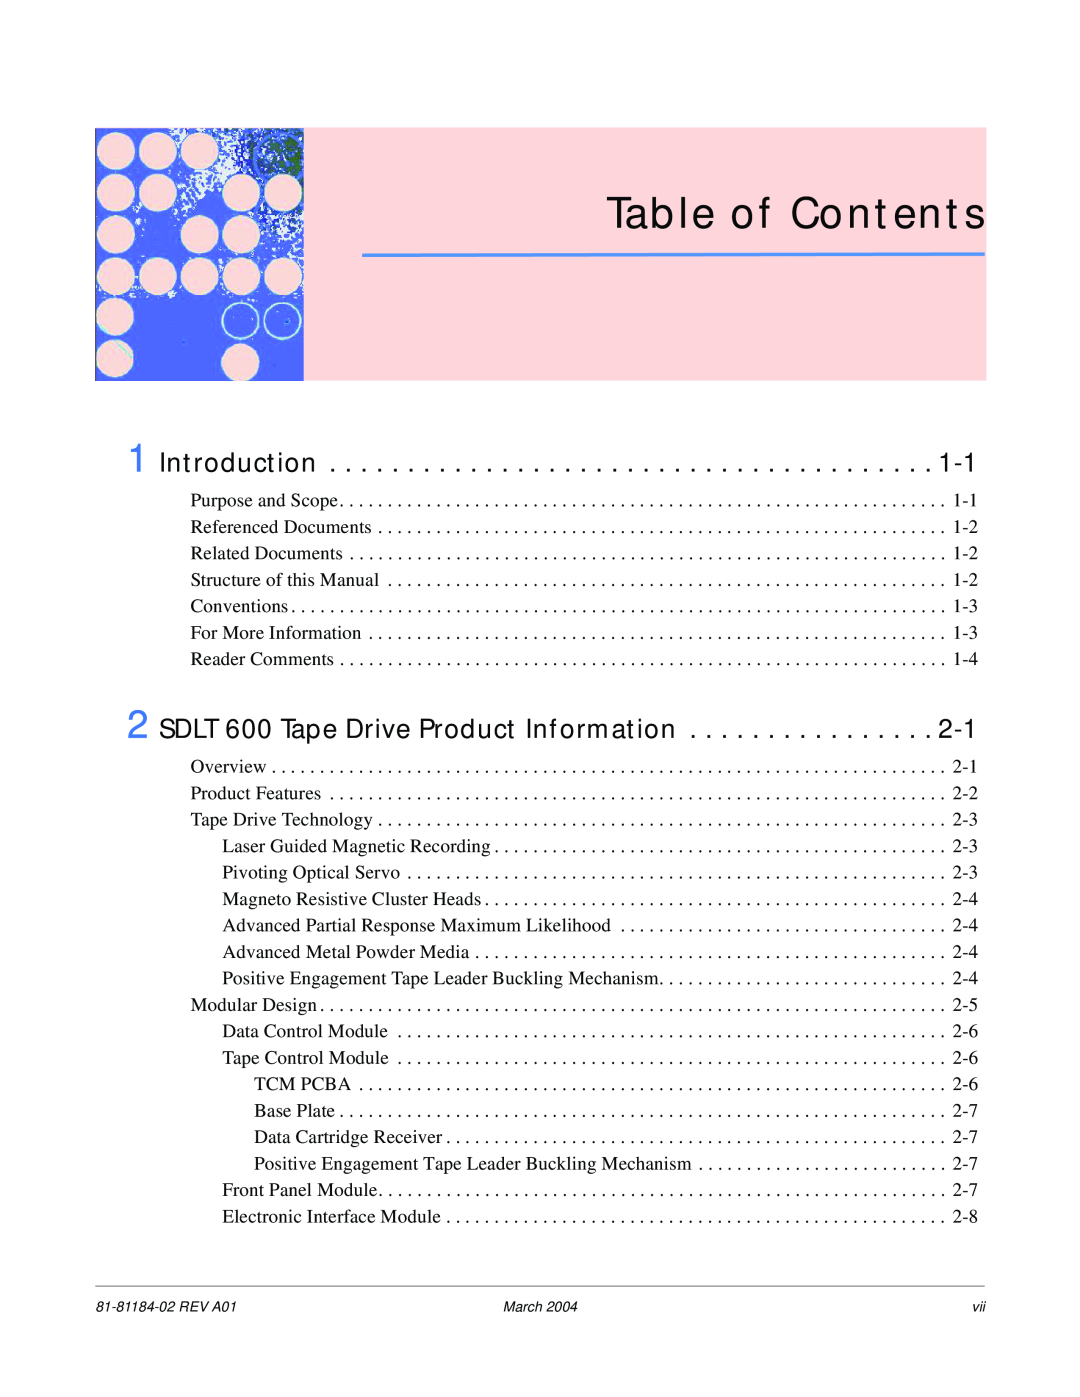 Tandberg Data manual Table of Contents, Introduction, SDLT 600 Tape Drive Product Information 